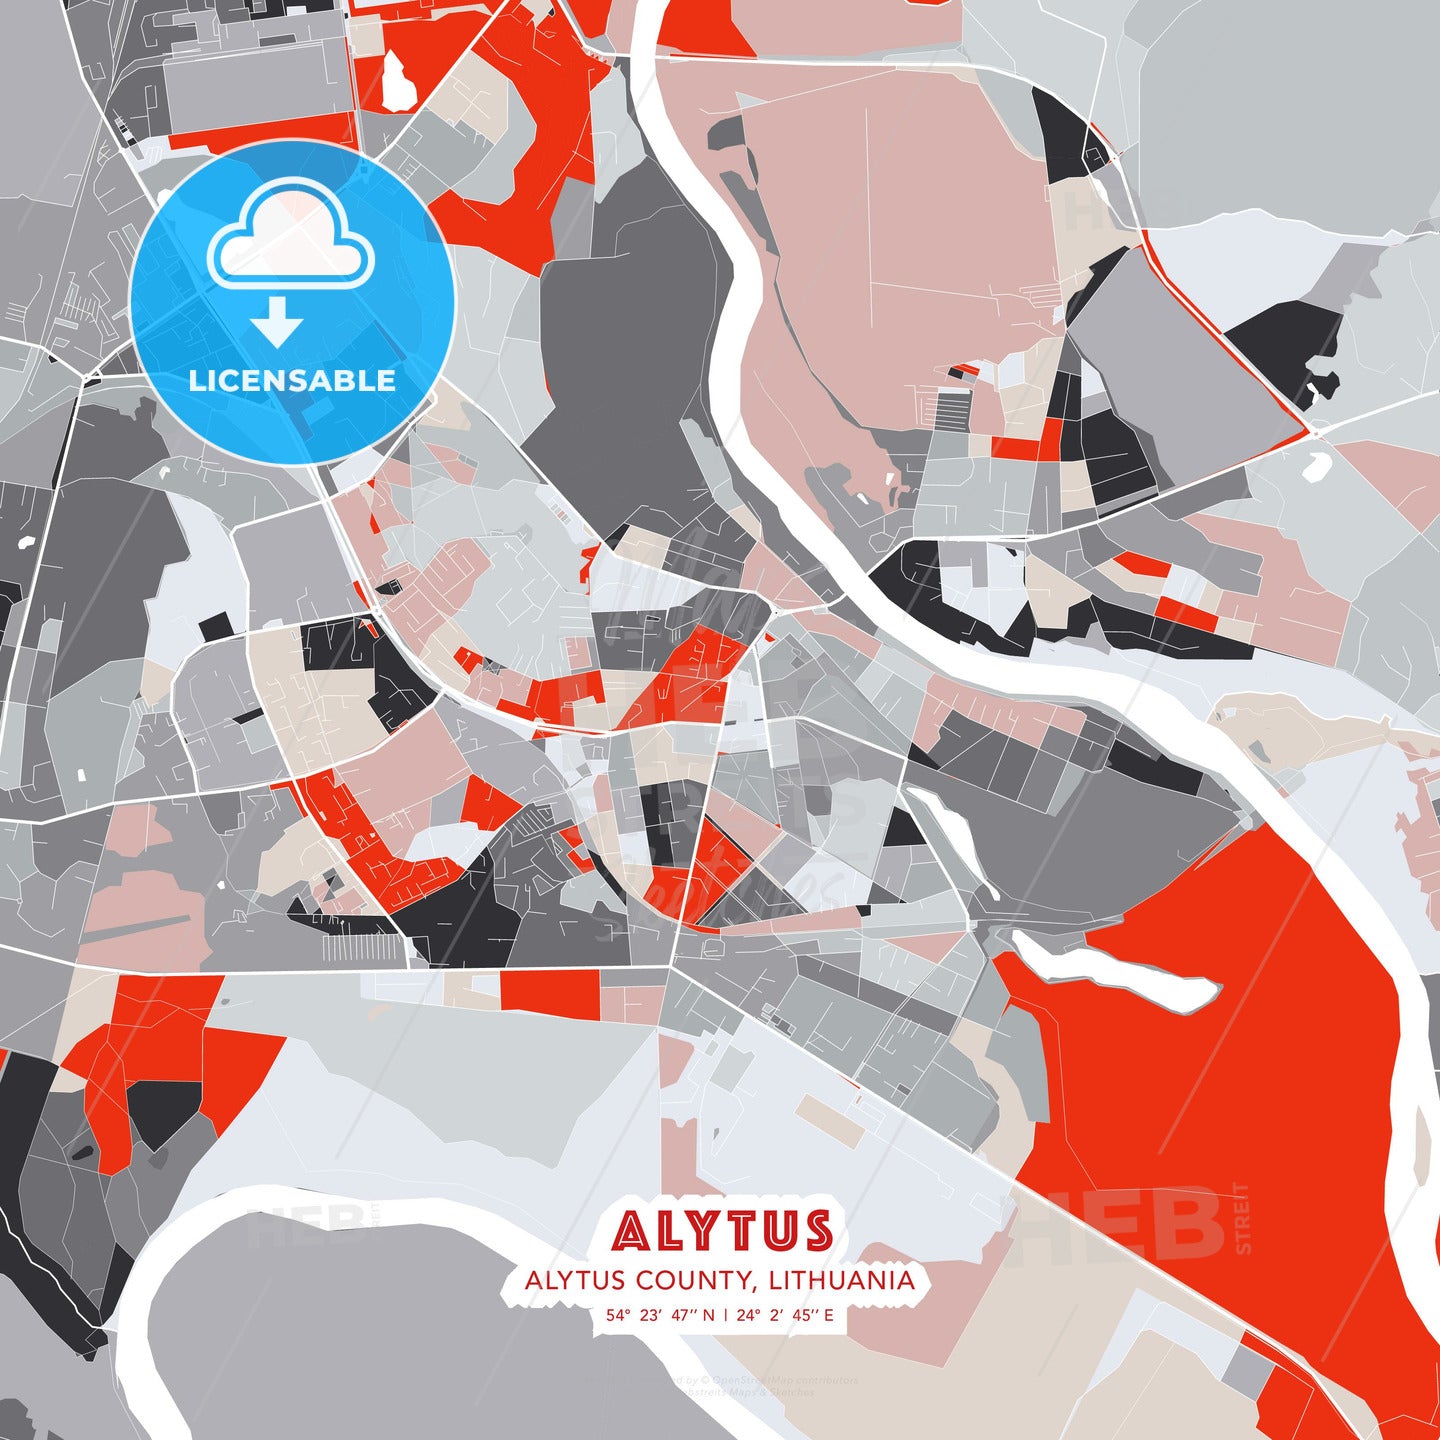 Alytus, Alytus County, Lithuania, modern map - HEBSTREITS Sketches